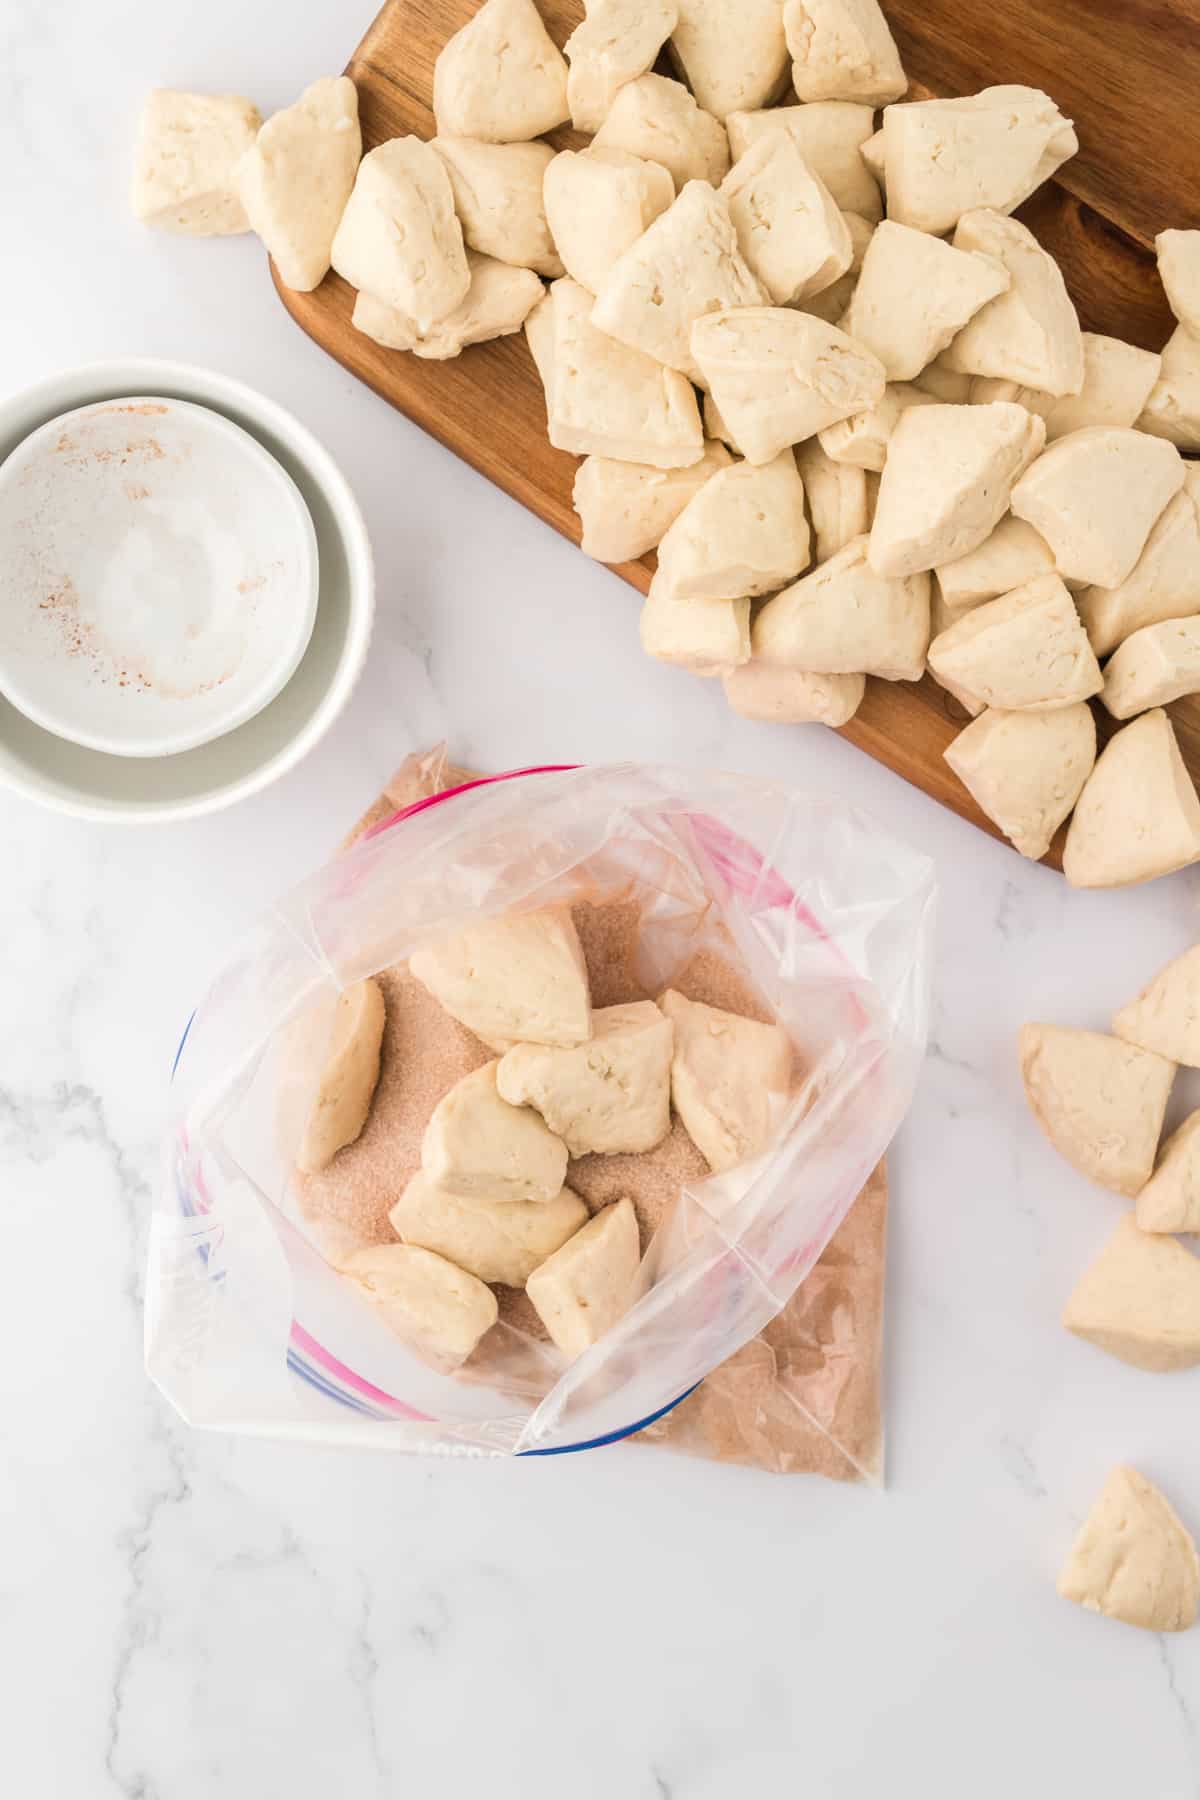 biscuit dough cut into pieces piled up on a cutting board beside a gallon plastic bag of biscuit dough pieces and with a cinnamon sugar mixture in the bottom